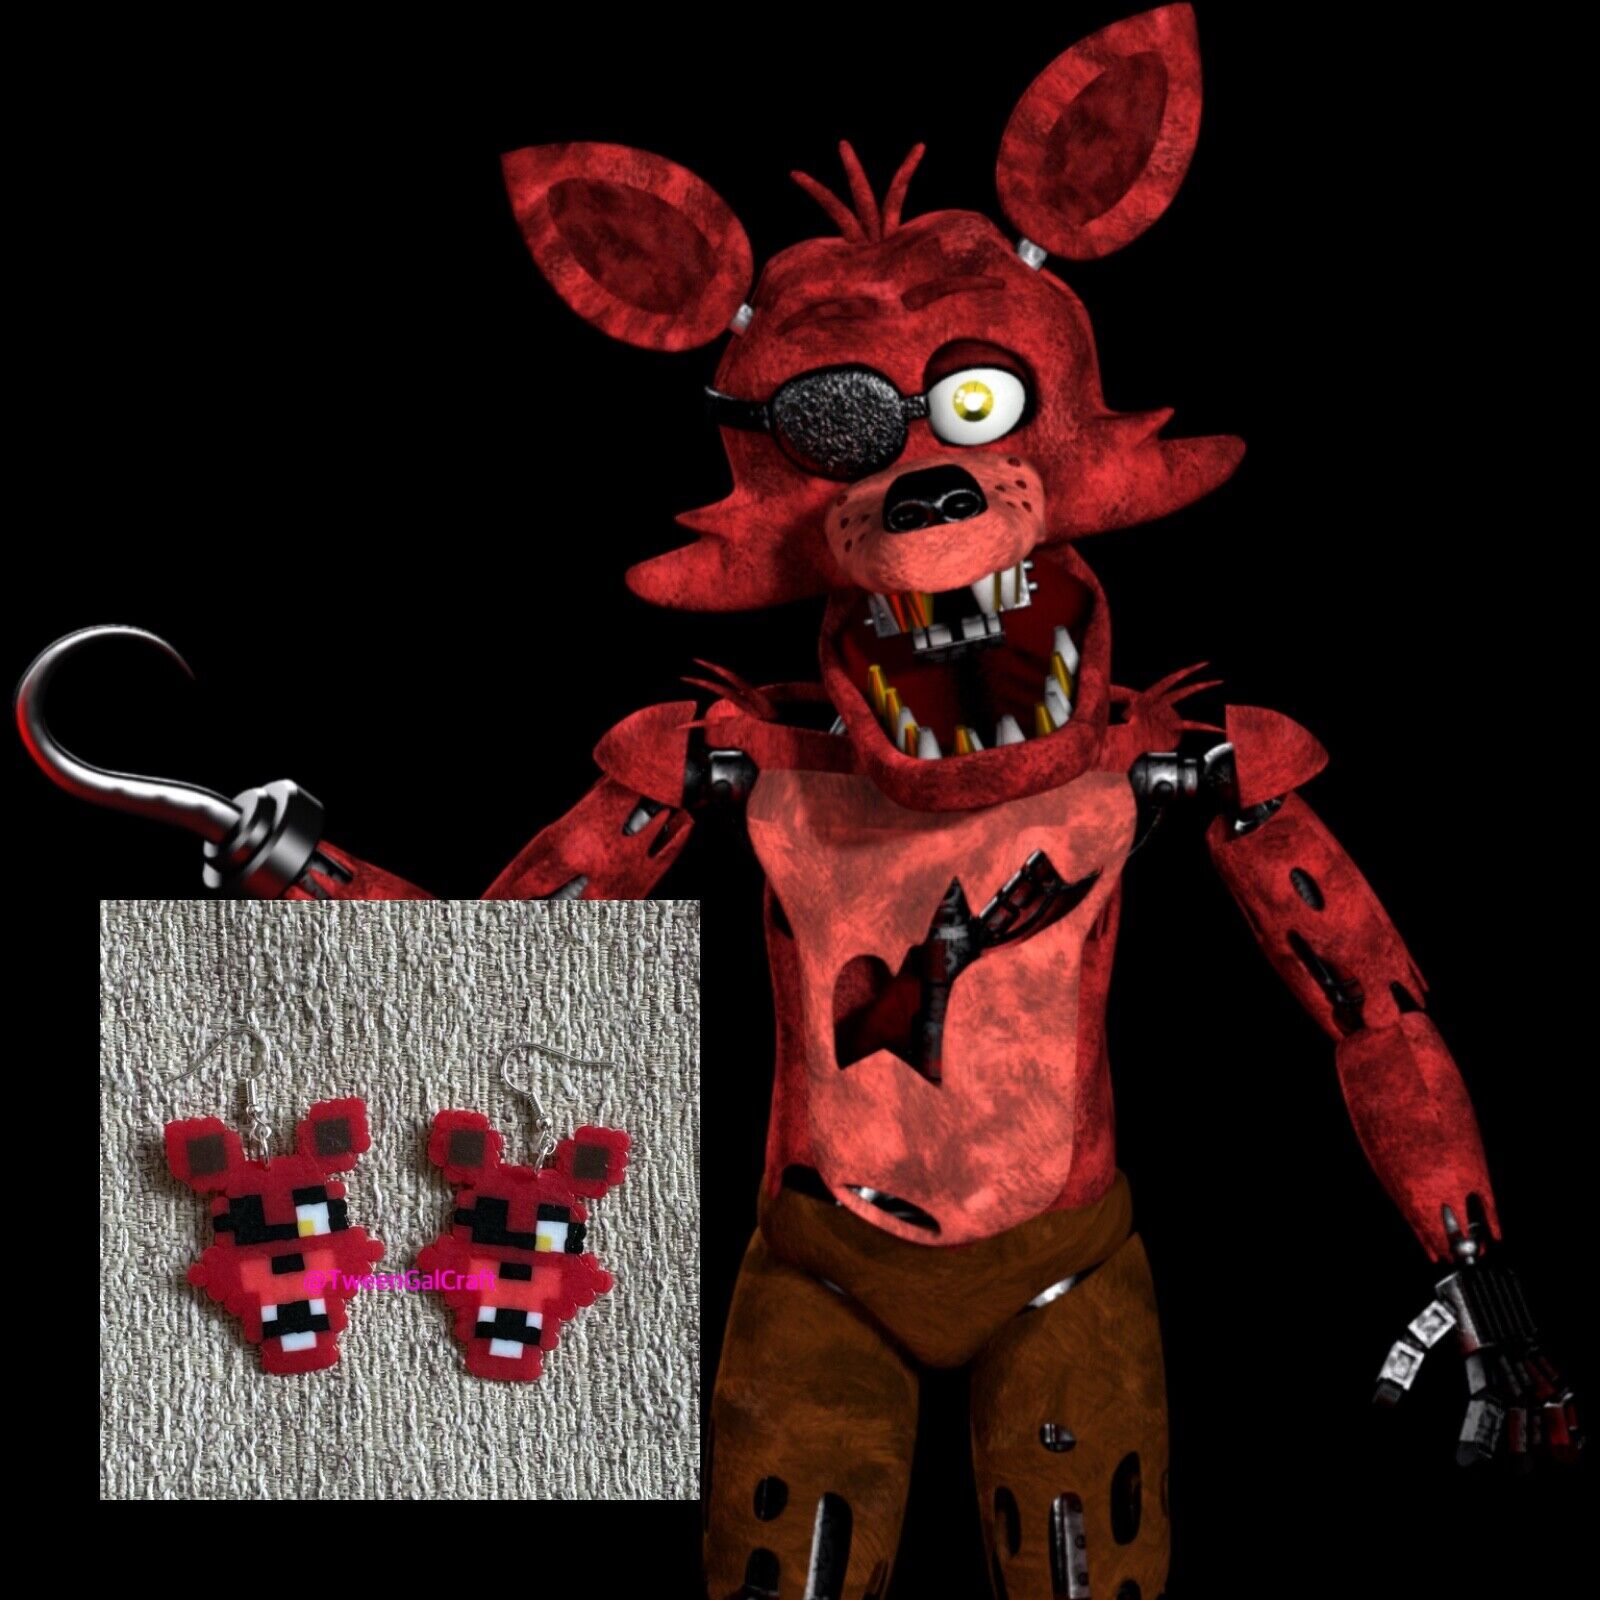 ansie dewet recommends pictures of foxy from five nights at freddys pic